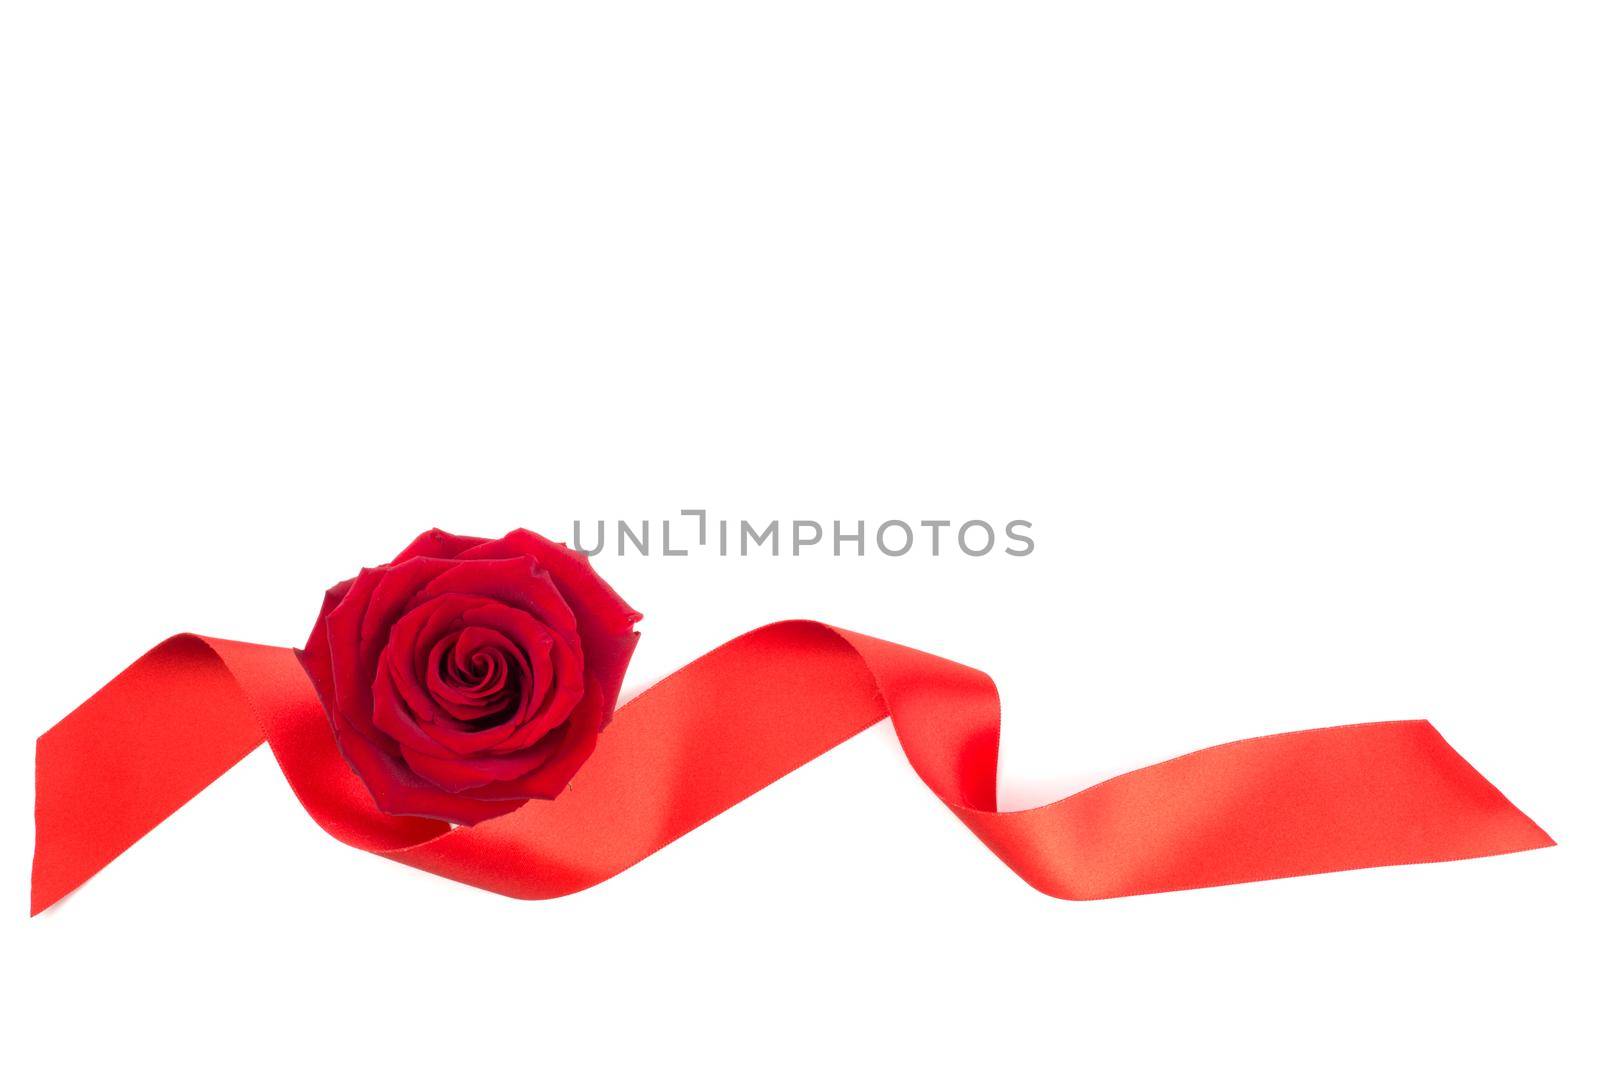 Red rose flower and ribbon arrangement isolated on white background, top view, design element for Valentines day, border frame element